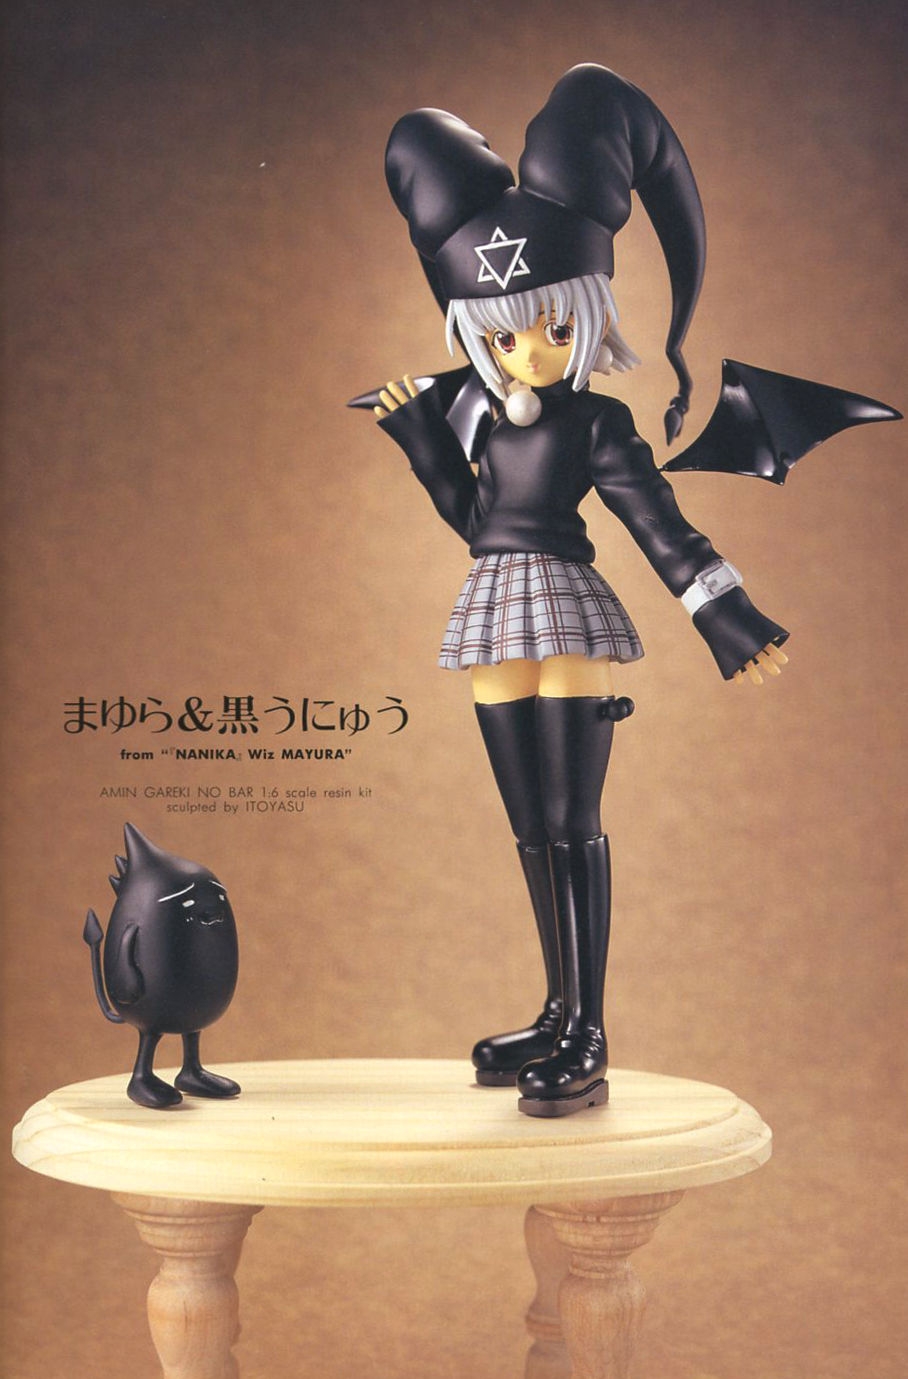 Hobby Japan Mook All That Figure 2001 88